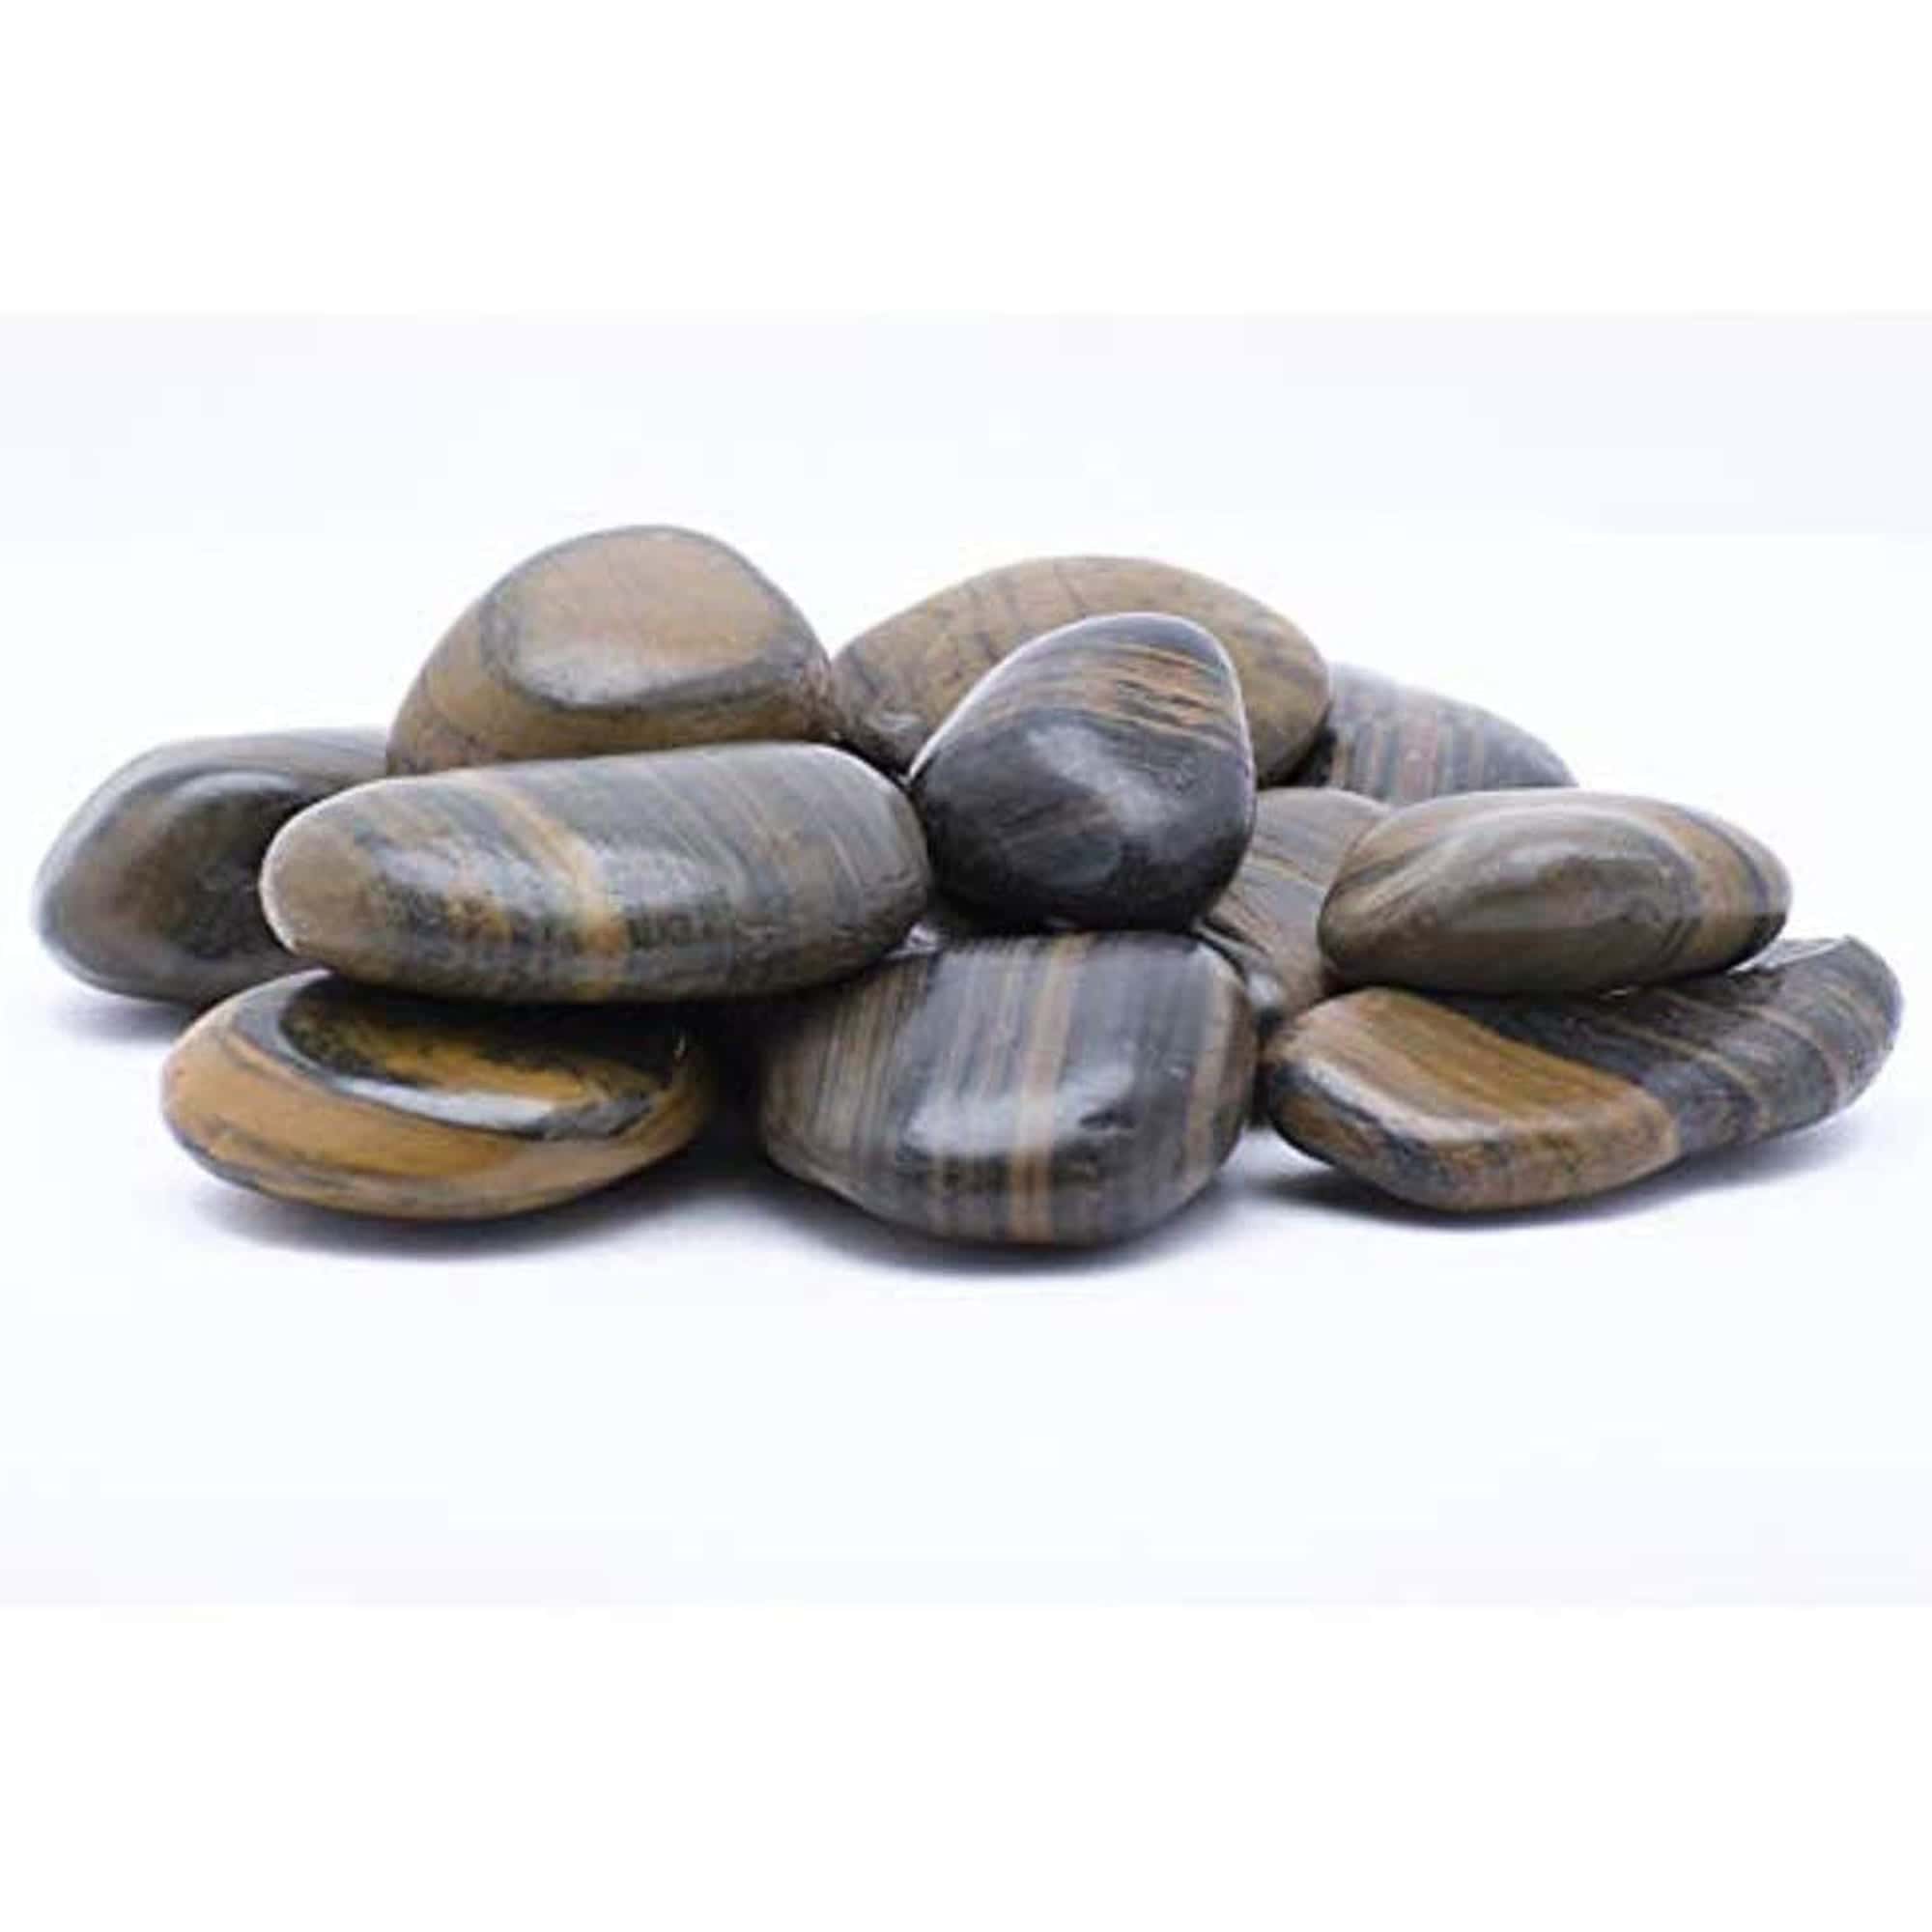 2 x Round Pebble Stepping Stones - Naturally Polished River Rock